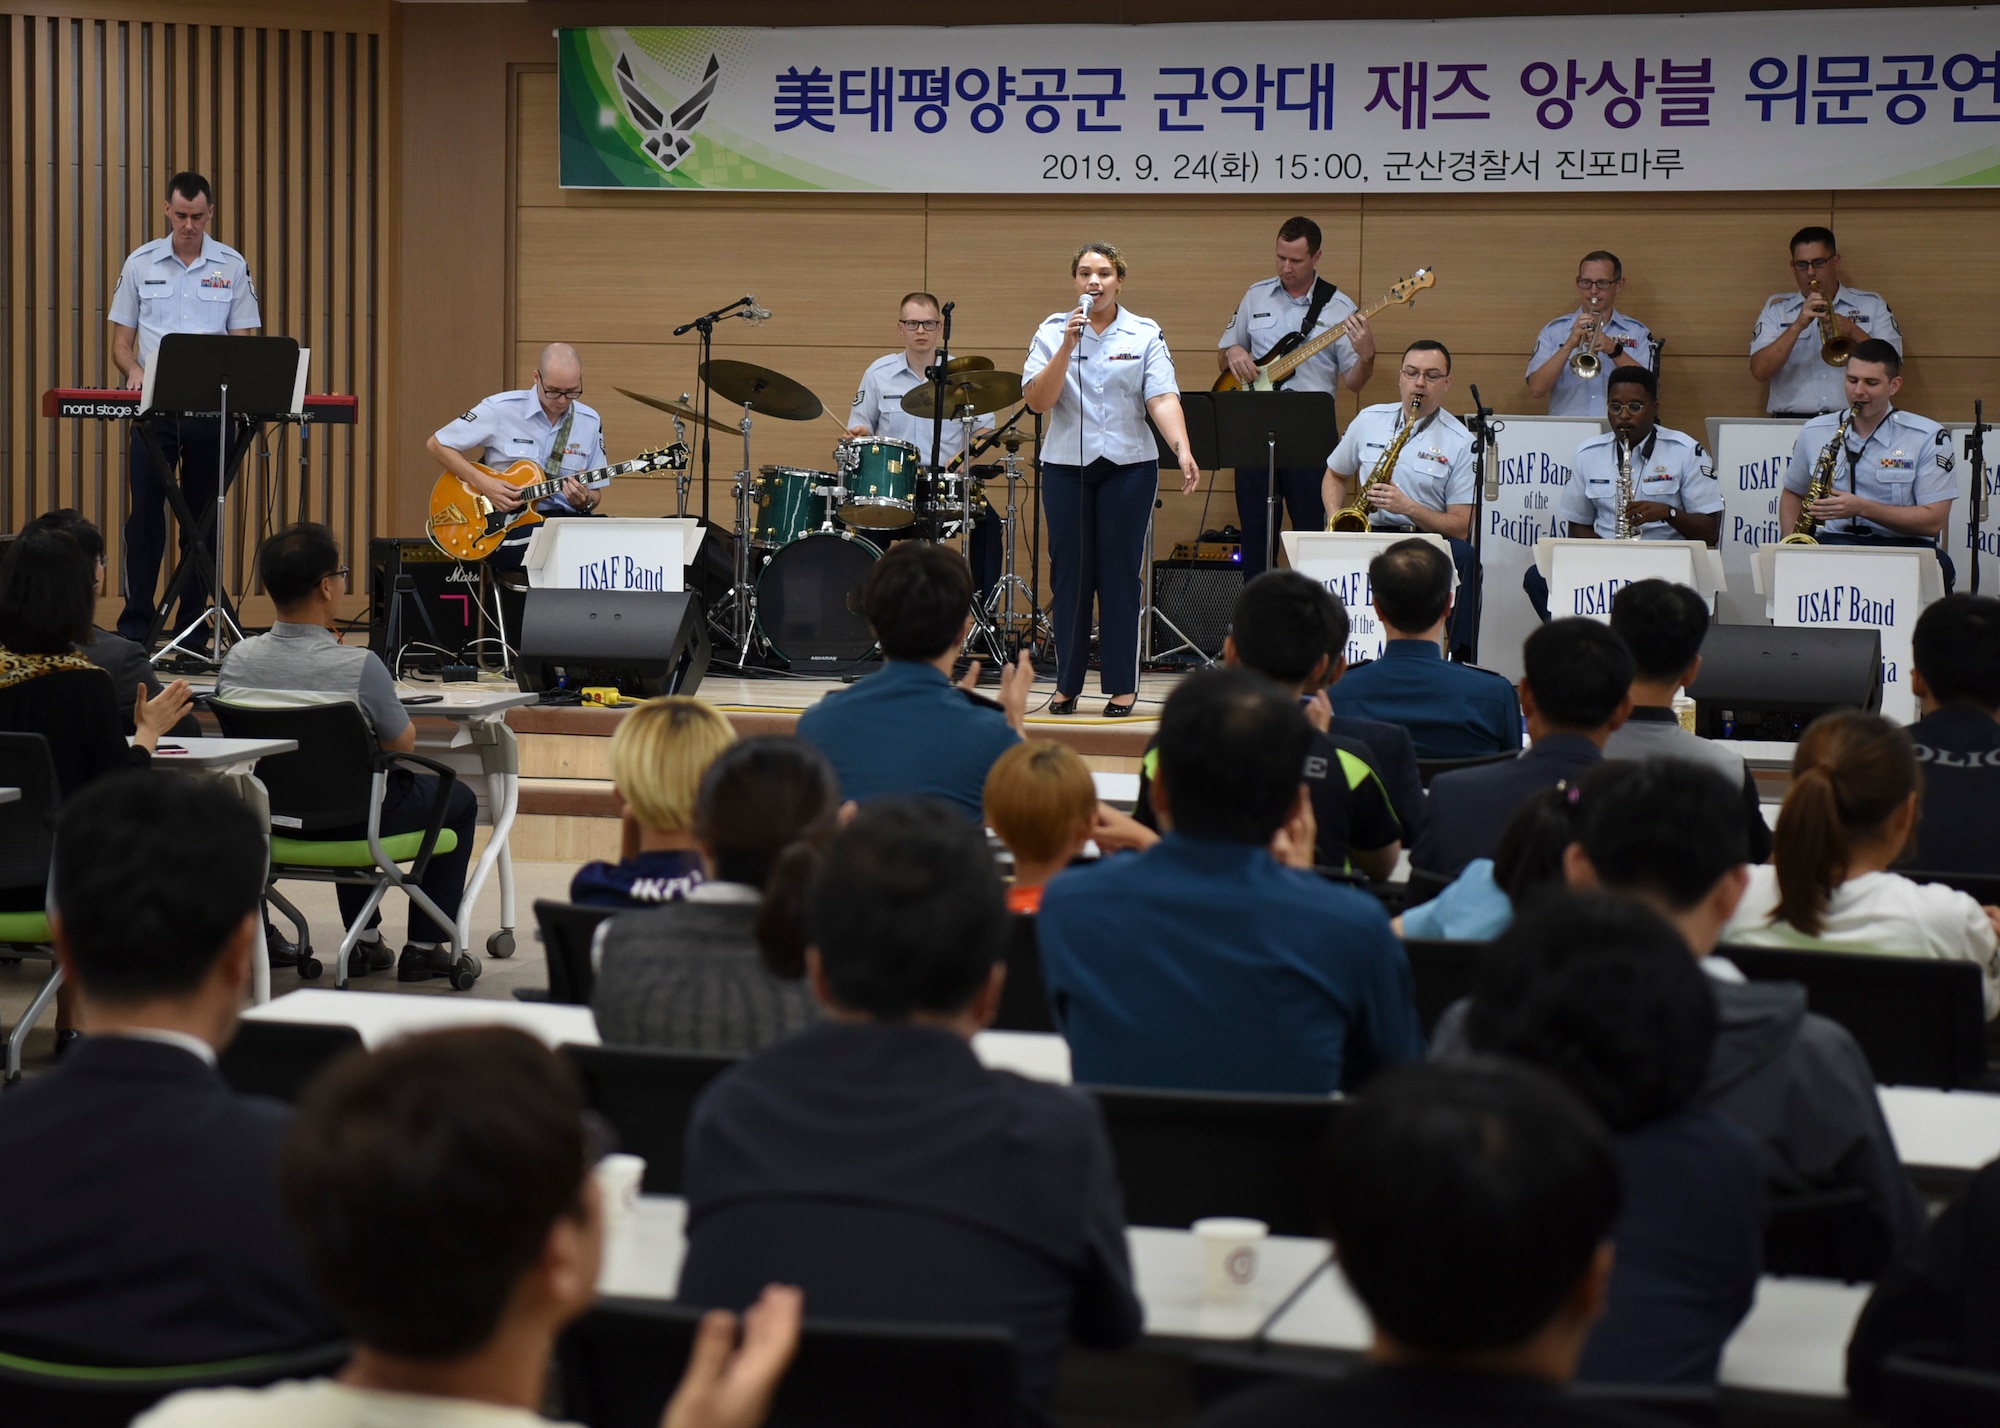 U.S. Air Force Band of the Pacific members play for the Gunsan Korean National Police in Gunsan City, Republic of Korea, Sept. 24, 2019. The Pacific Showcase jazz ensemble consists of multiple instruments including saxophone, trumpet, drums and guitar. (U.S. Air Force photo by Staff Sgt. Anthony Hetlage)